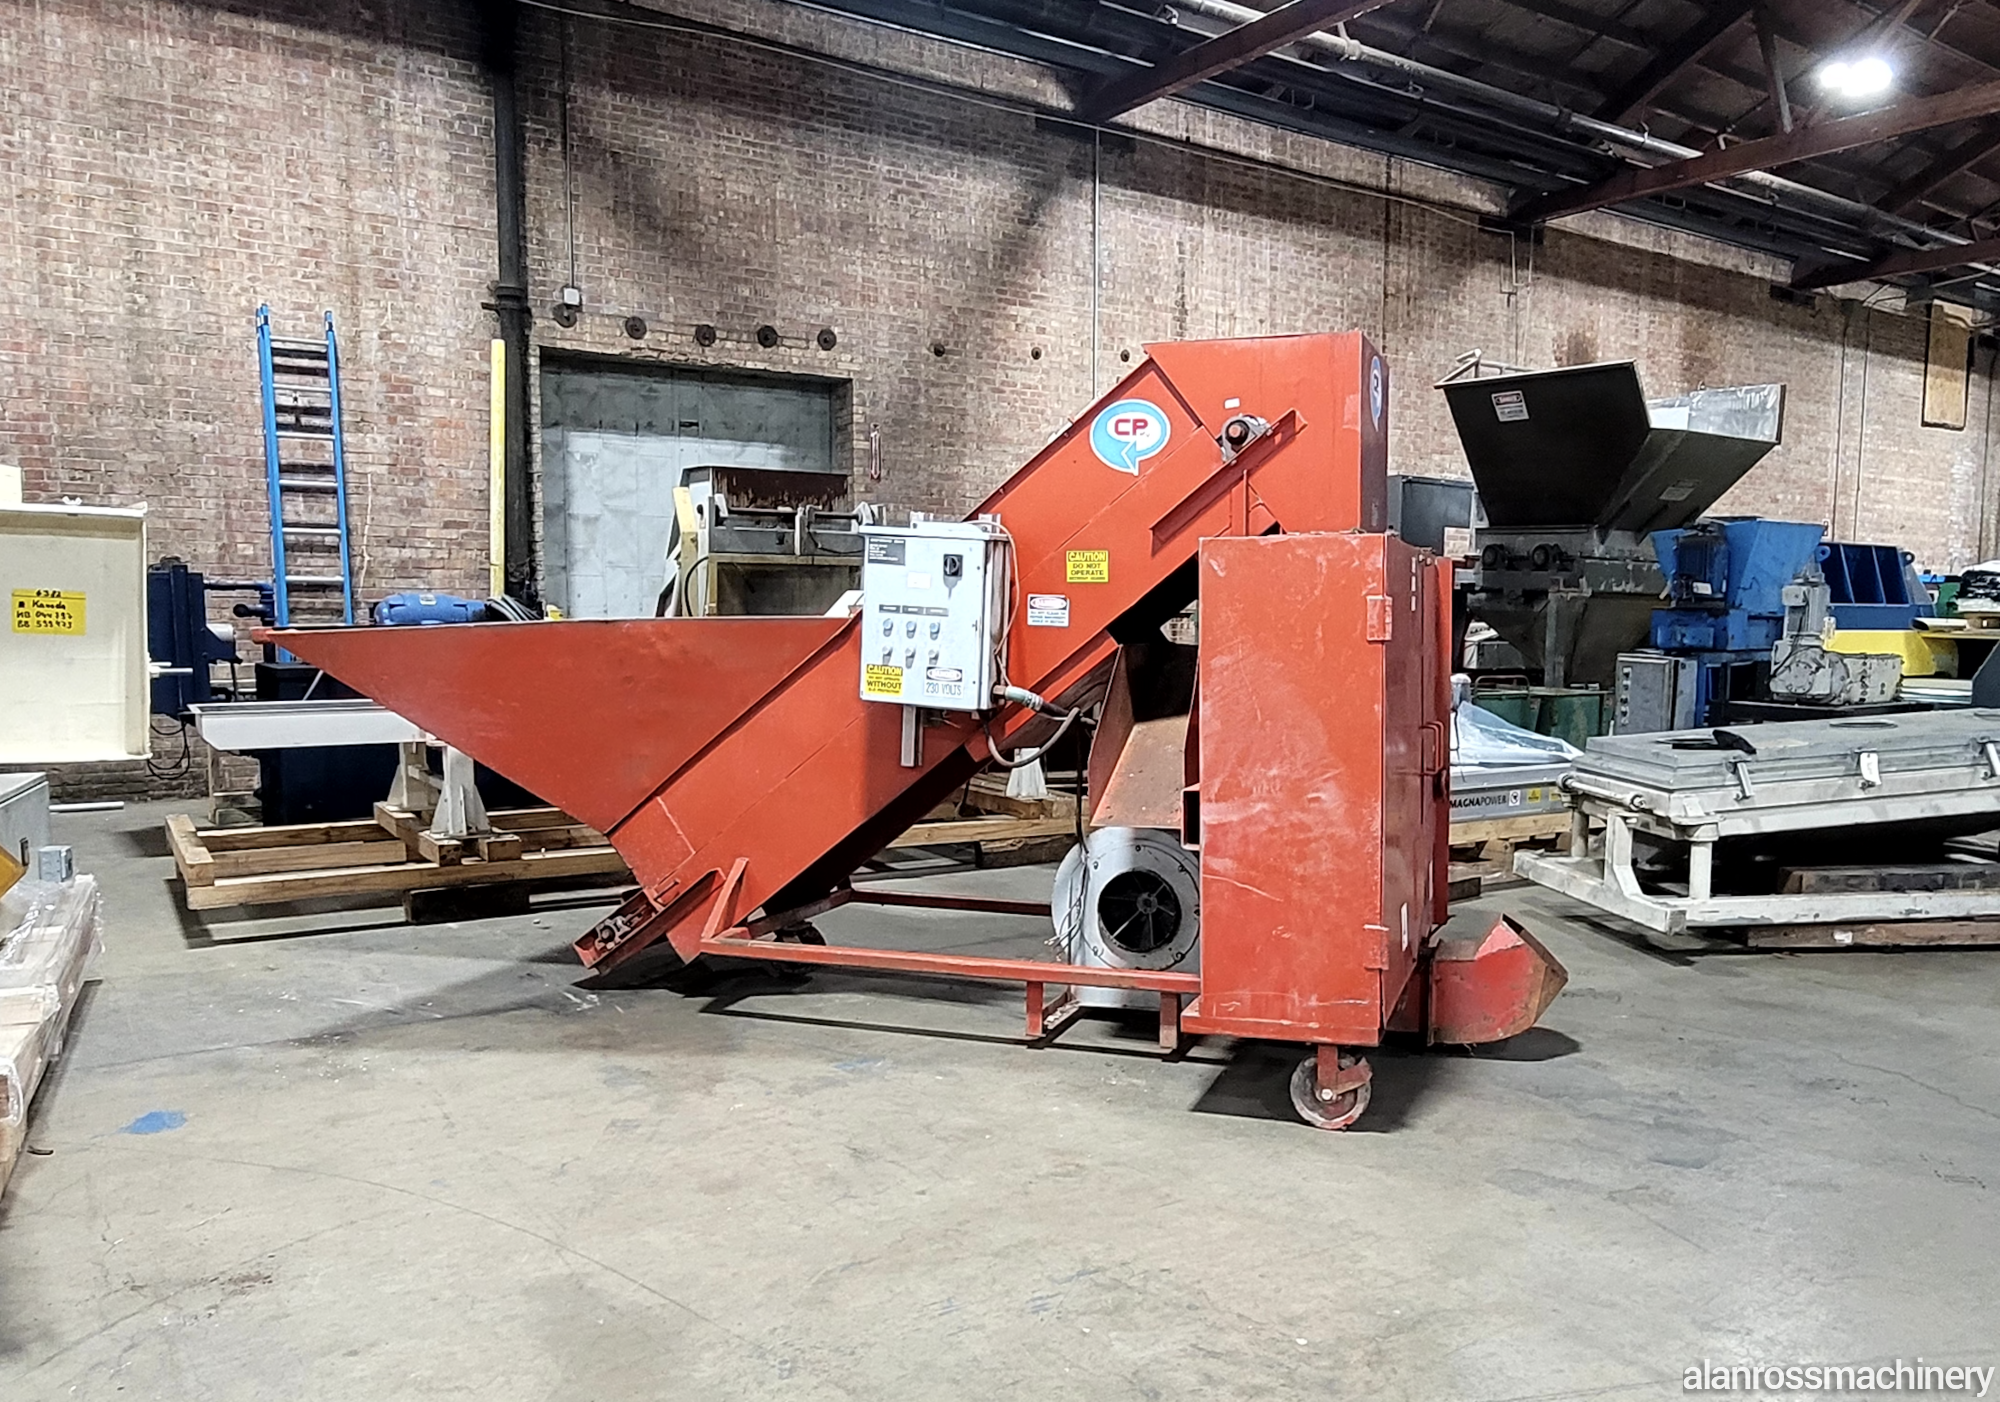 CP MFG CP 200/3R Can Processing | Alan Ross Machinery